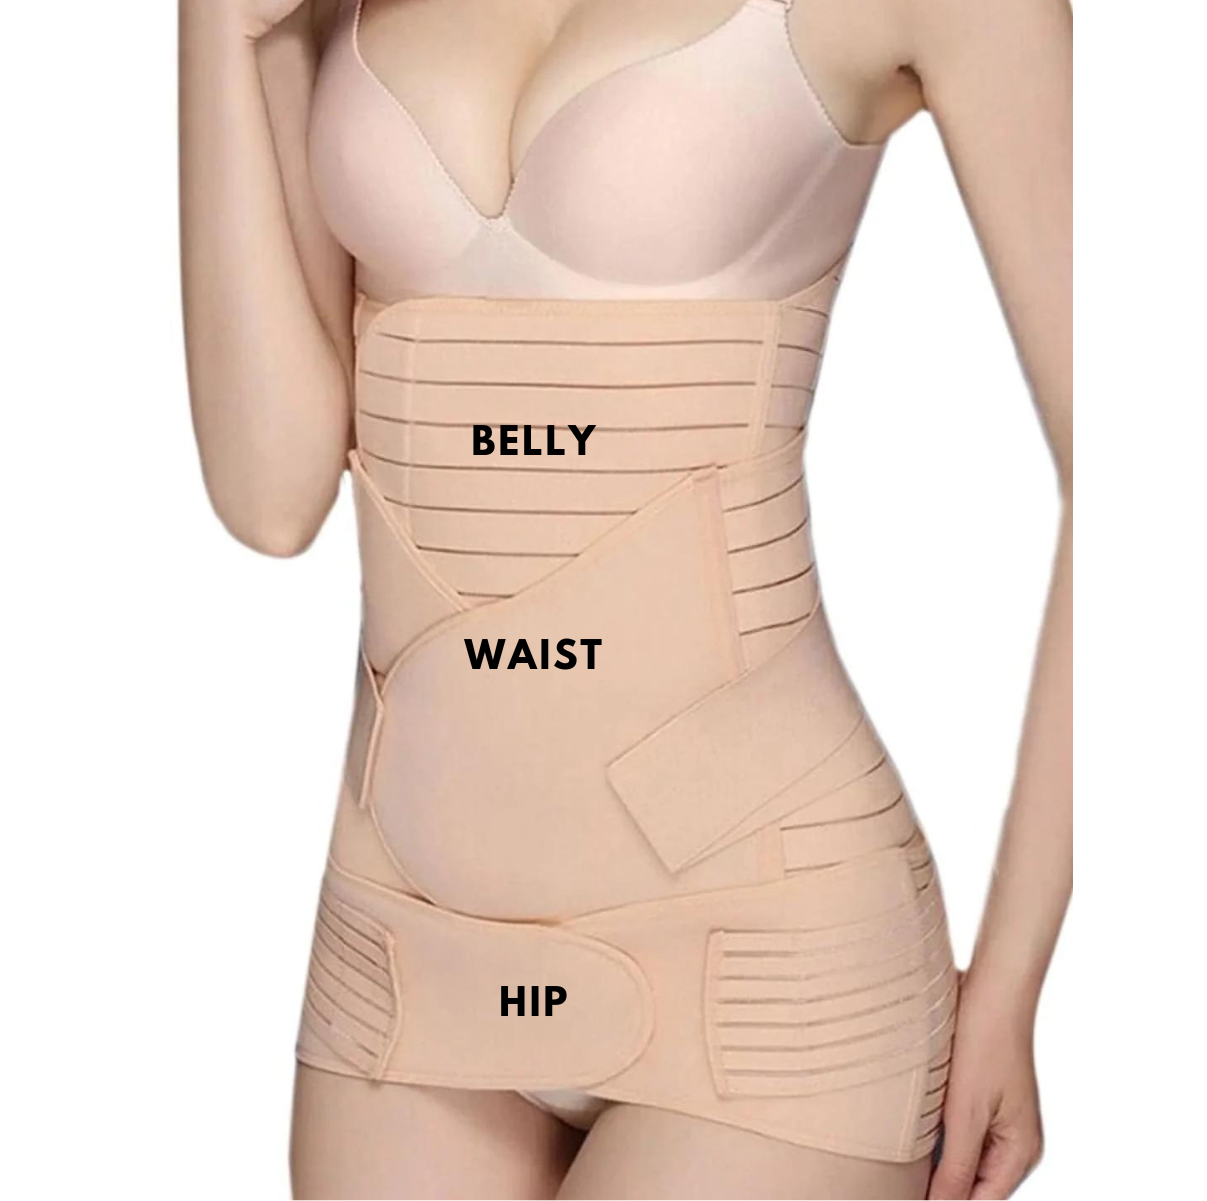 3 In 1 Postpartum Girdle Support Recovery Belt - Sale price - Buy online in  Pakistan 